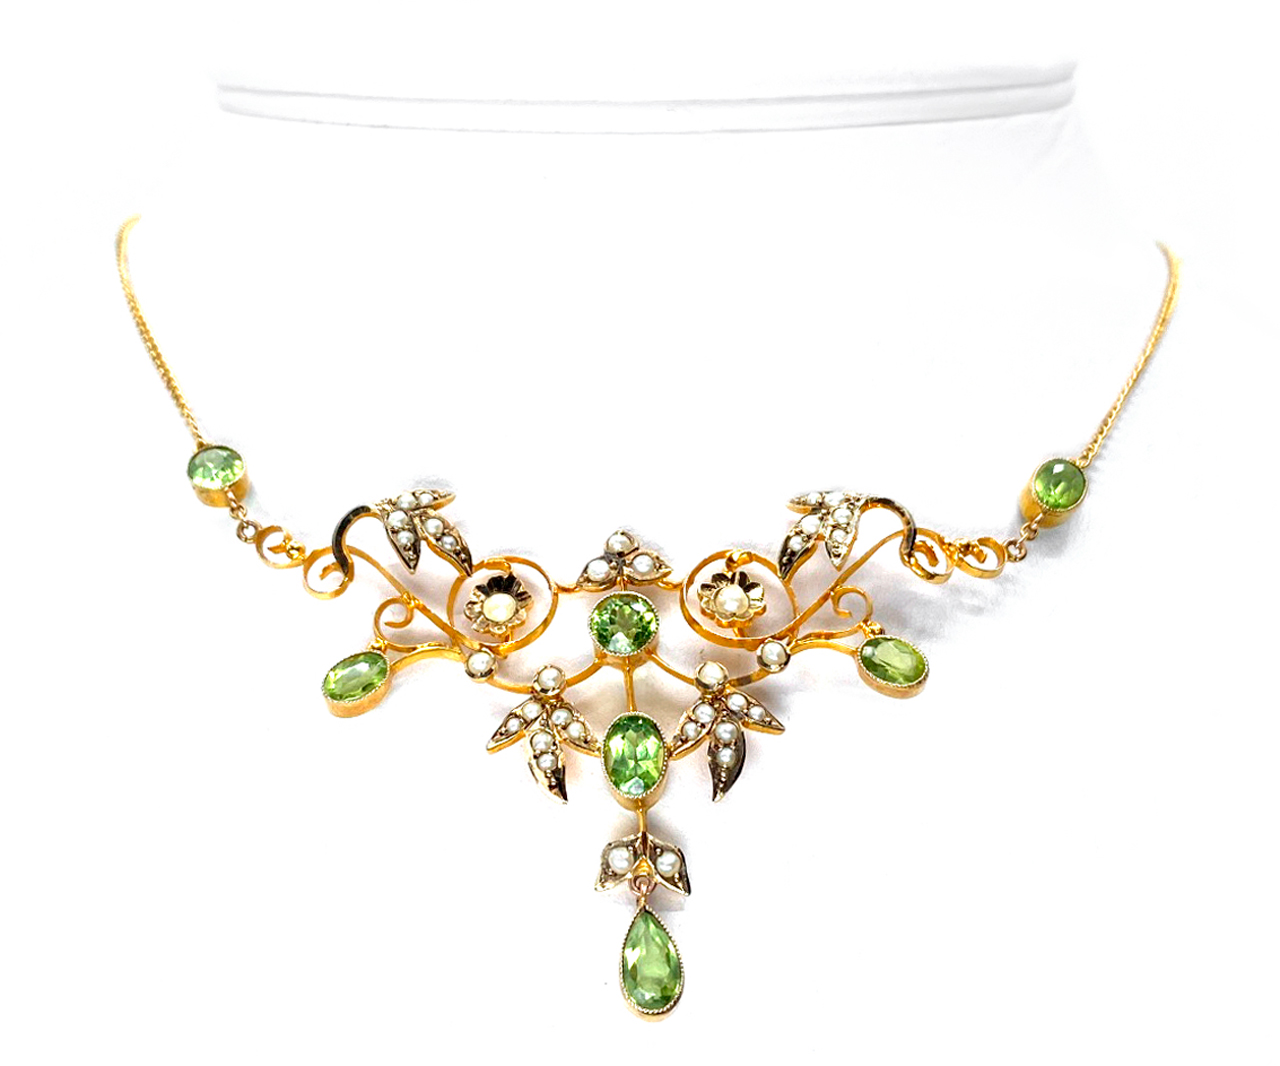 Designs by Nature Gems Raw Peridot Necklace, August Birthstone Jewelry,  With 24 Inch Antique Bronze Chain, Genuine Raw Crystal, Handmade in Canada  : Amazon.ca: Handmade Products